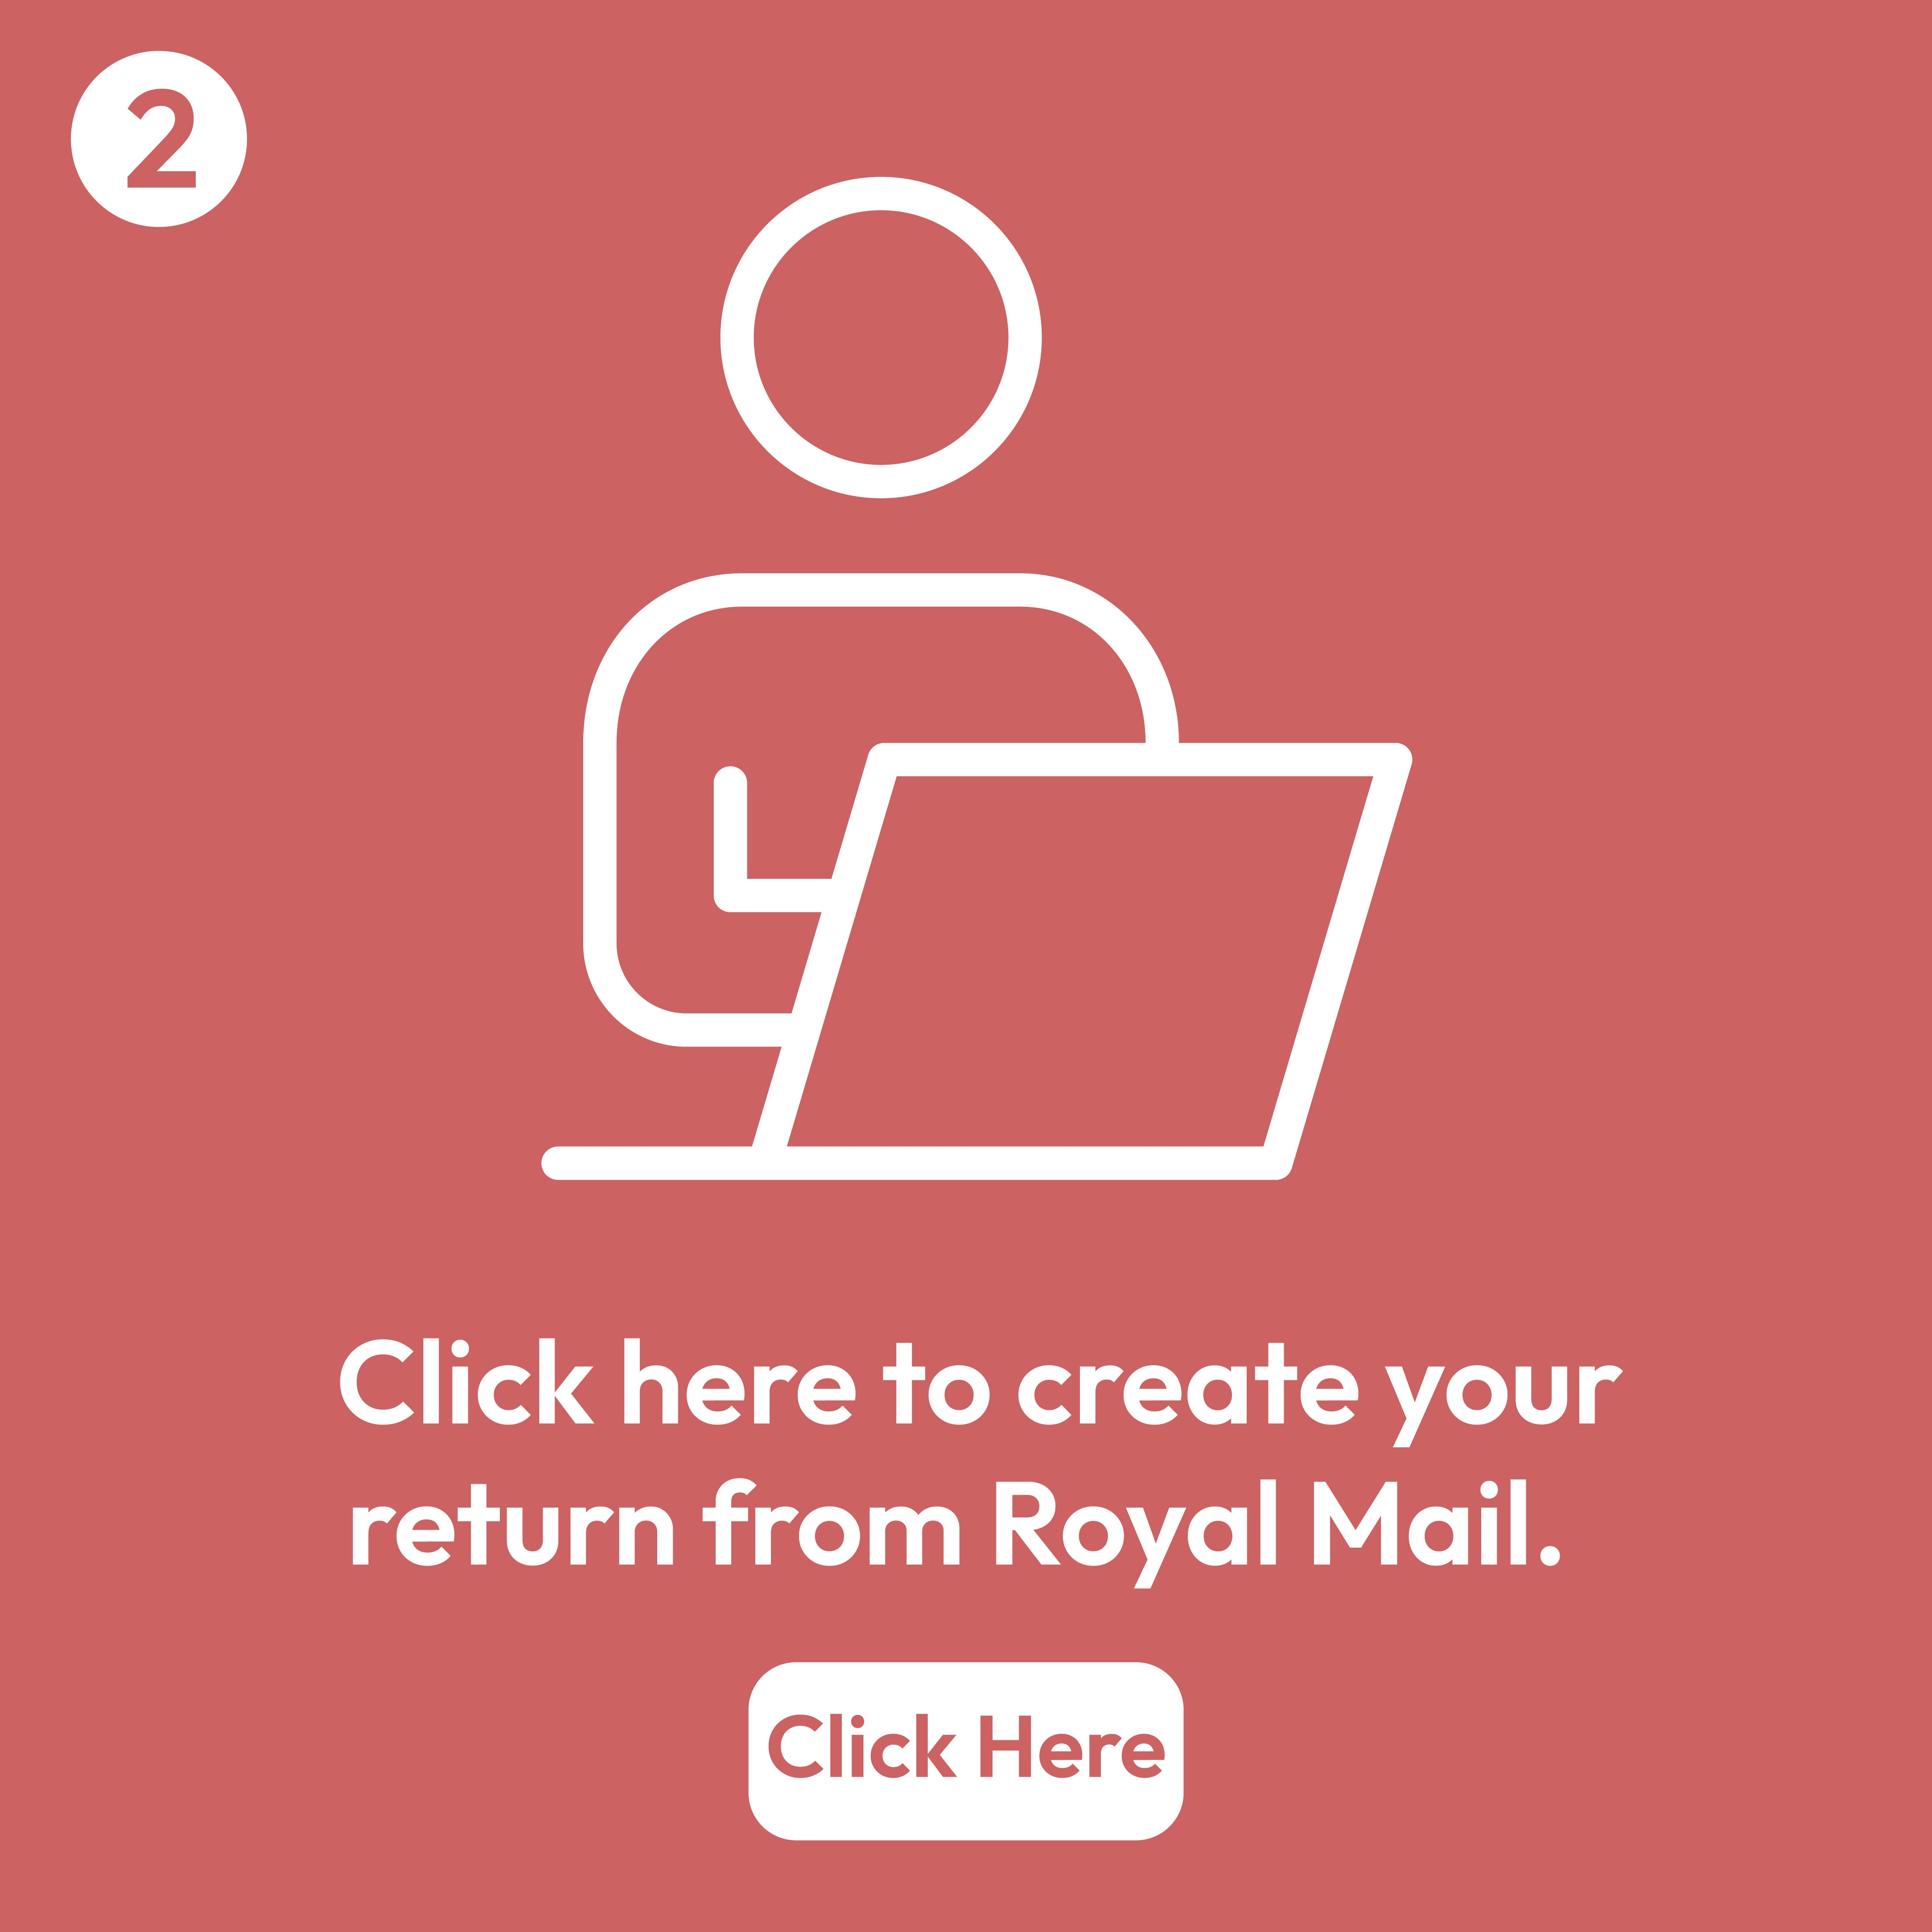 Create your return from Royal Mail